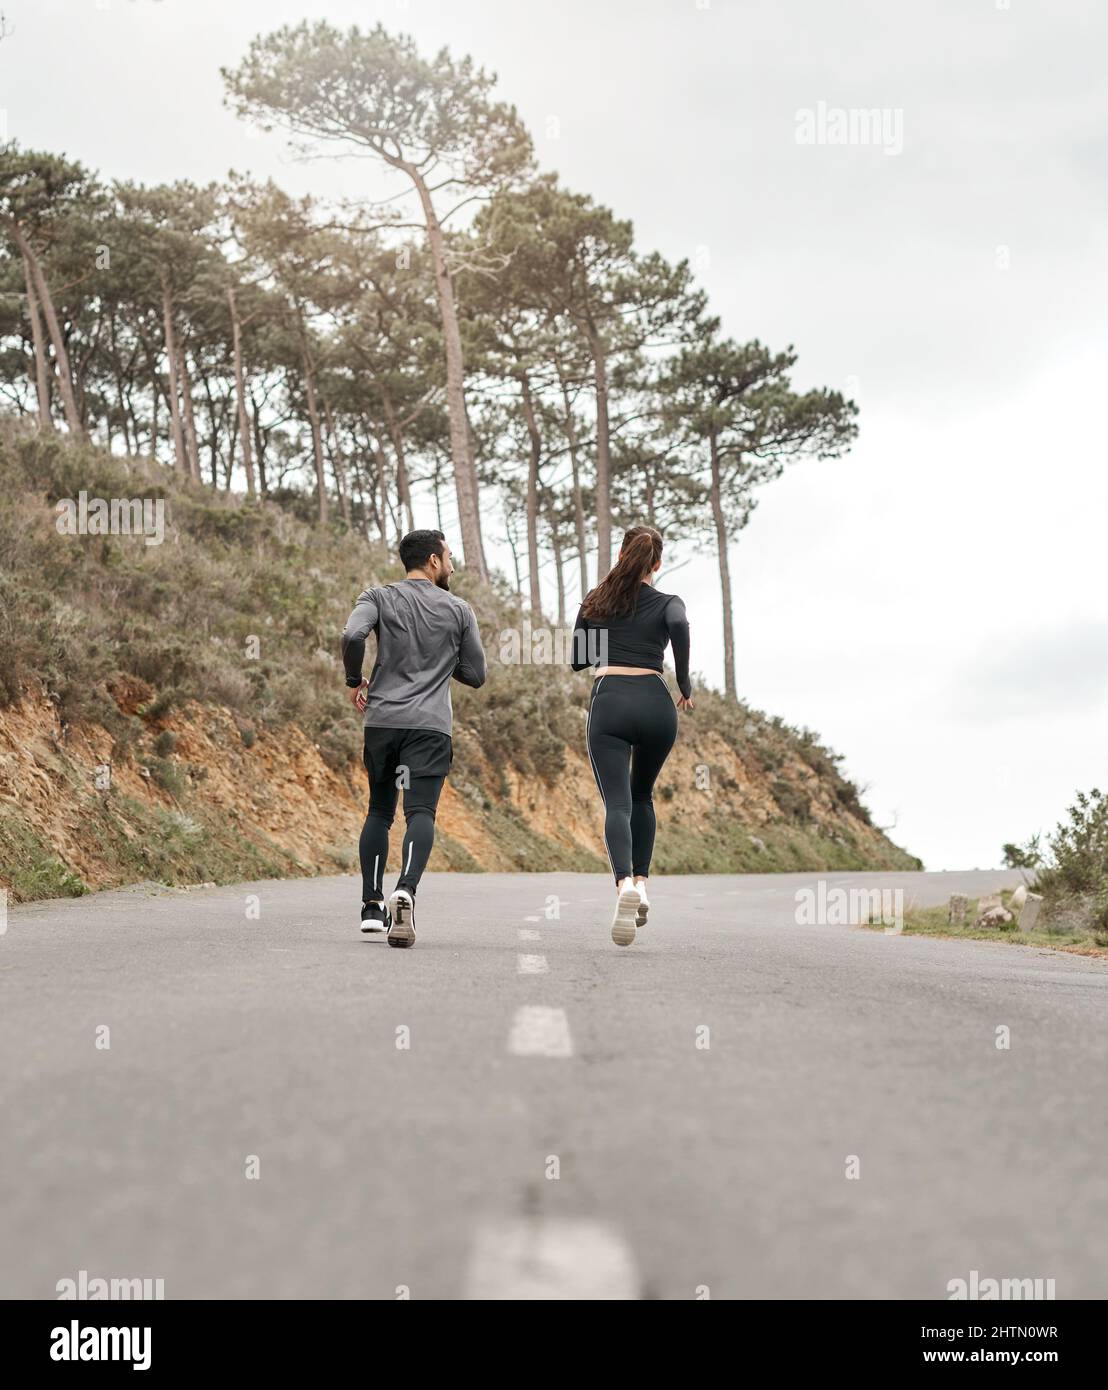 Fitness doesnt take off days. Full length shot of two unrecognizable athletes bonding together during a run outdoors. Stock Photo